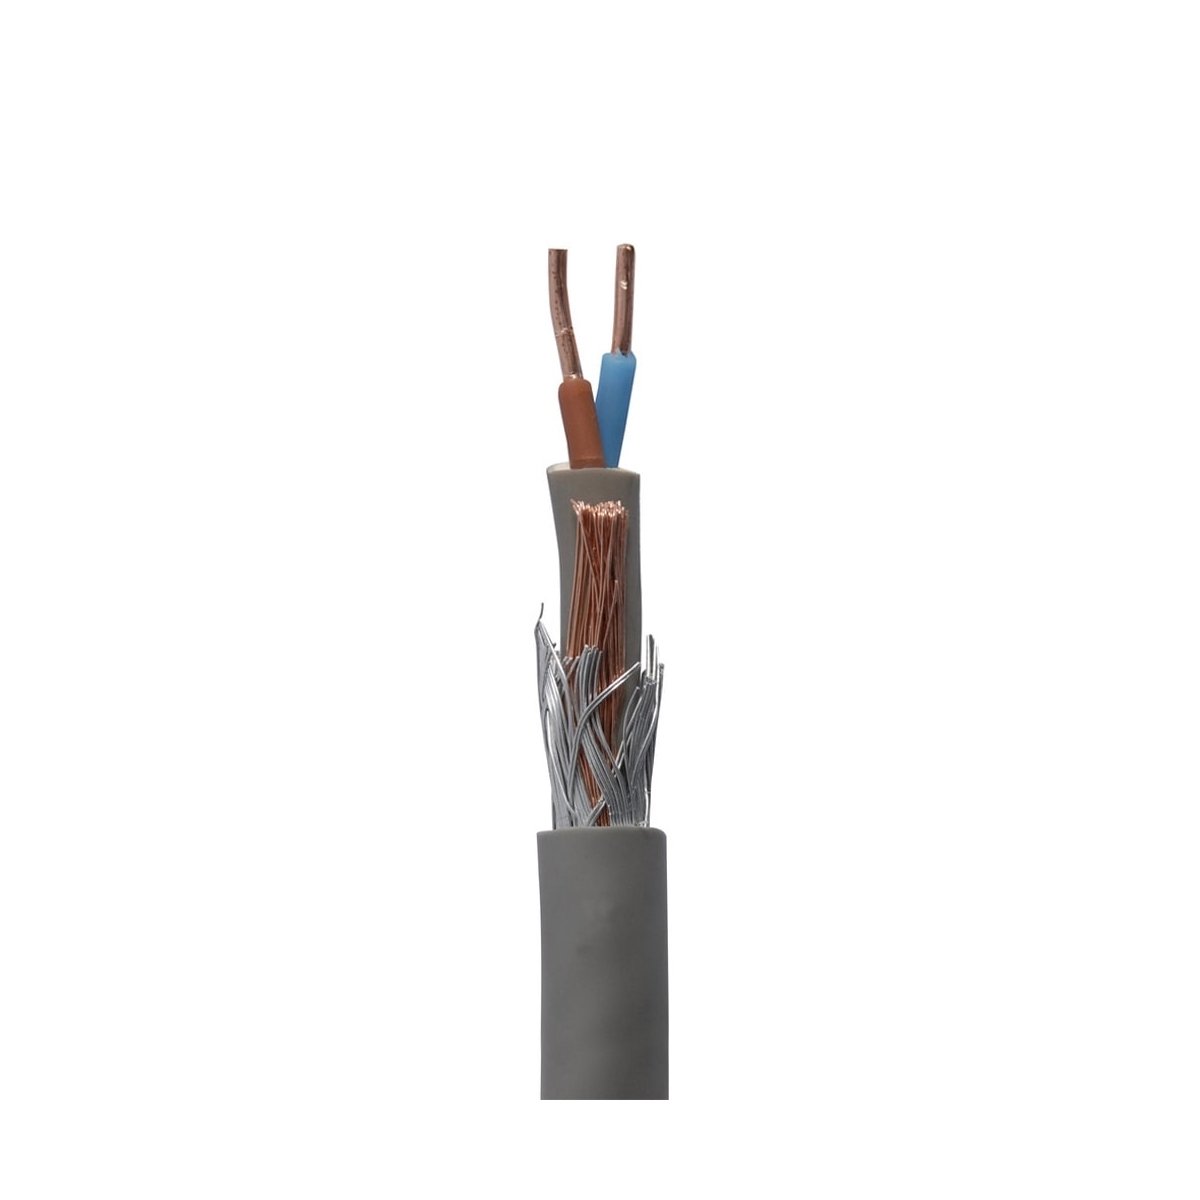 Outdoor Lighting Connection Material Ground cable 2 x 2.5 mm2 earth wire - 100 m